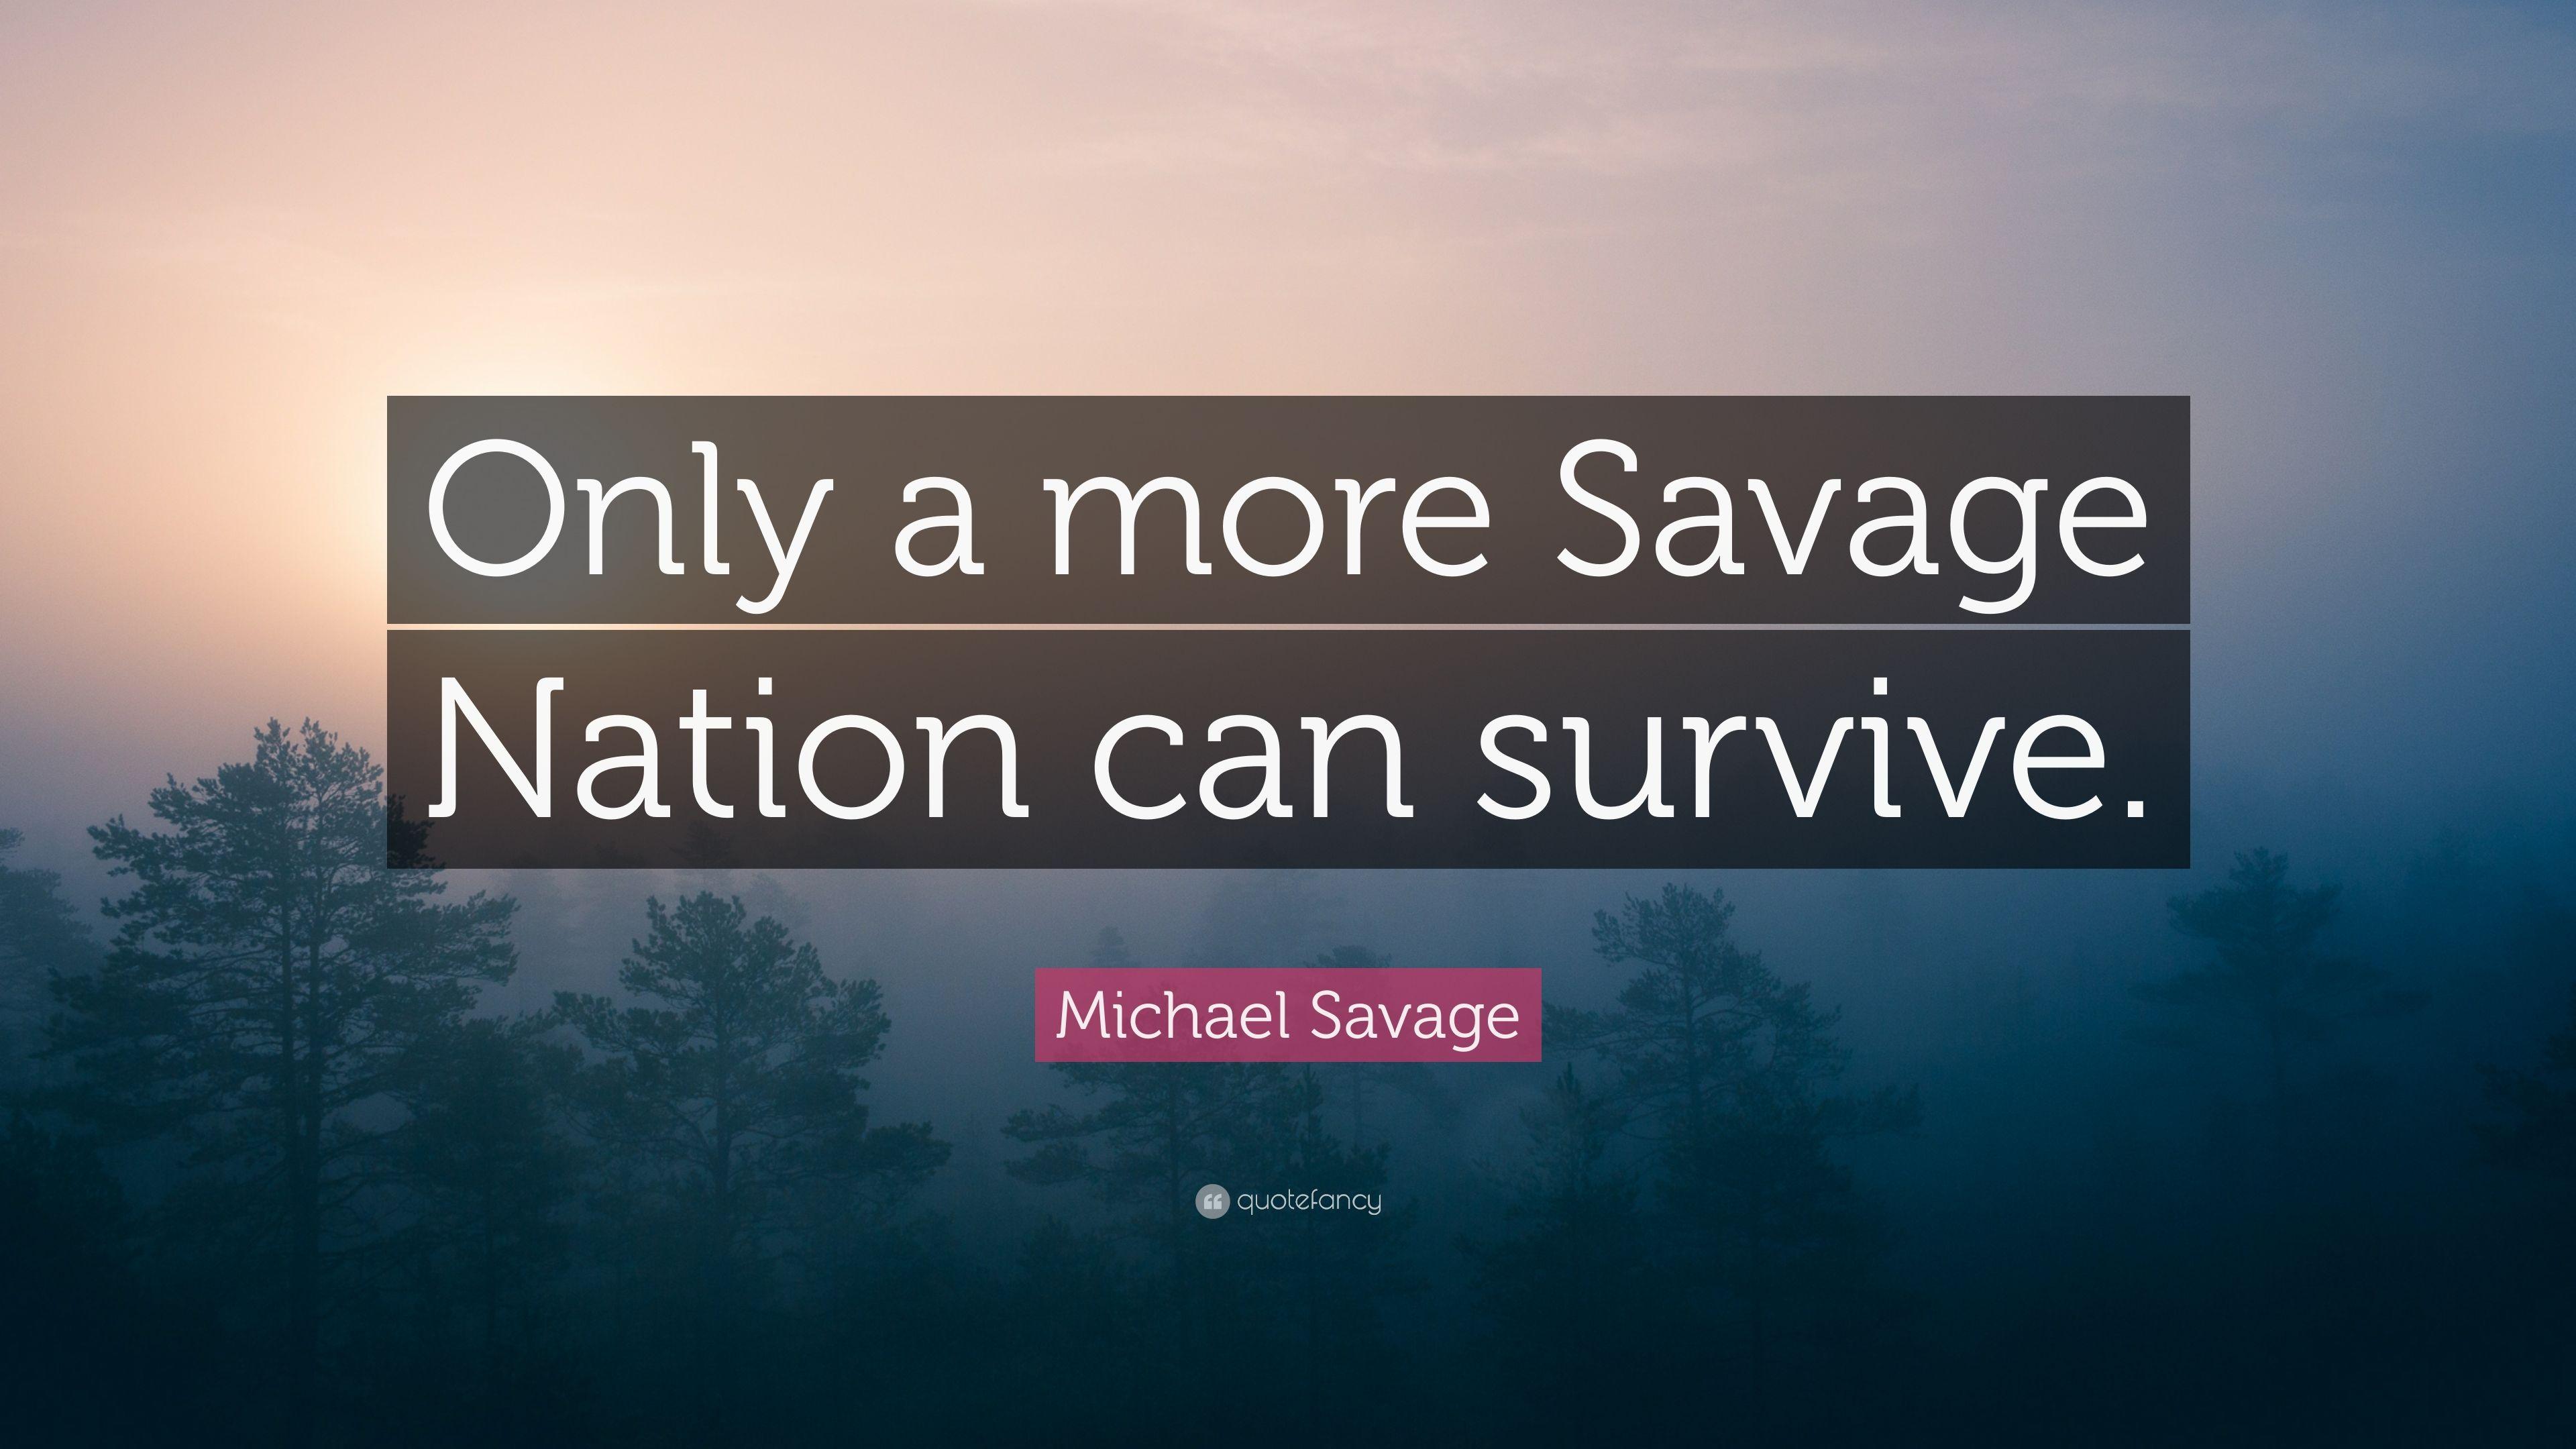 Savage Nation Logo - Michael Savage Quote: “Only a more Savage Nation can survive.” 9